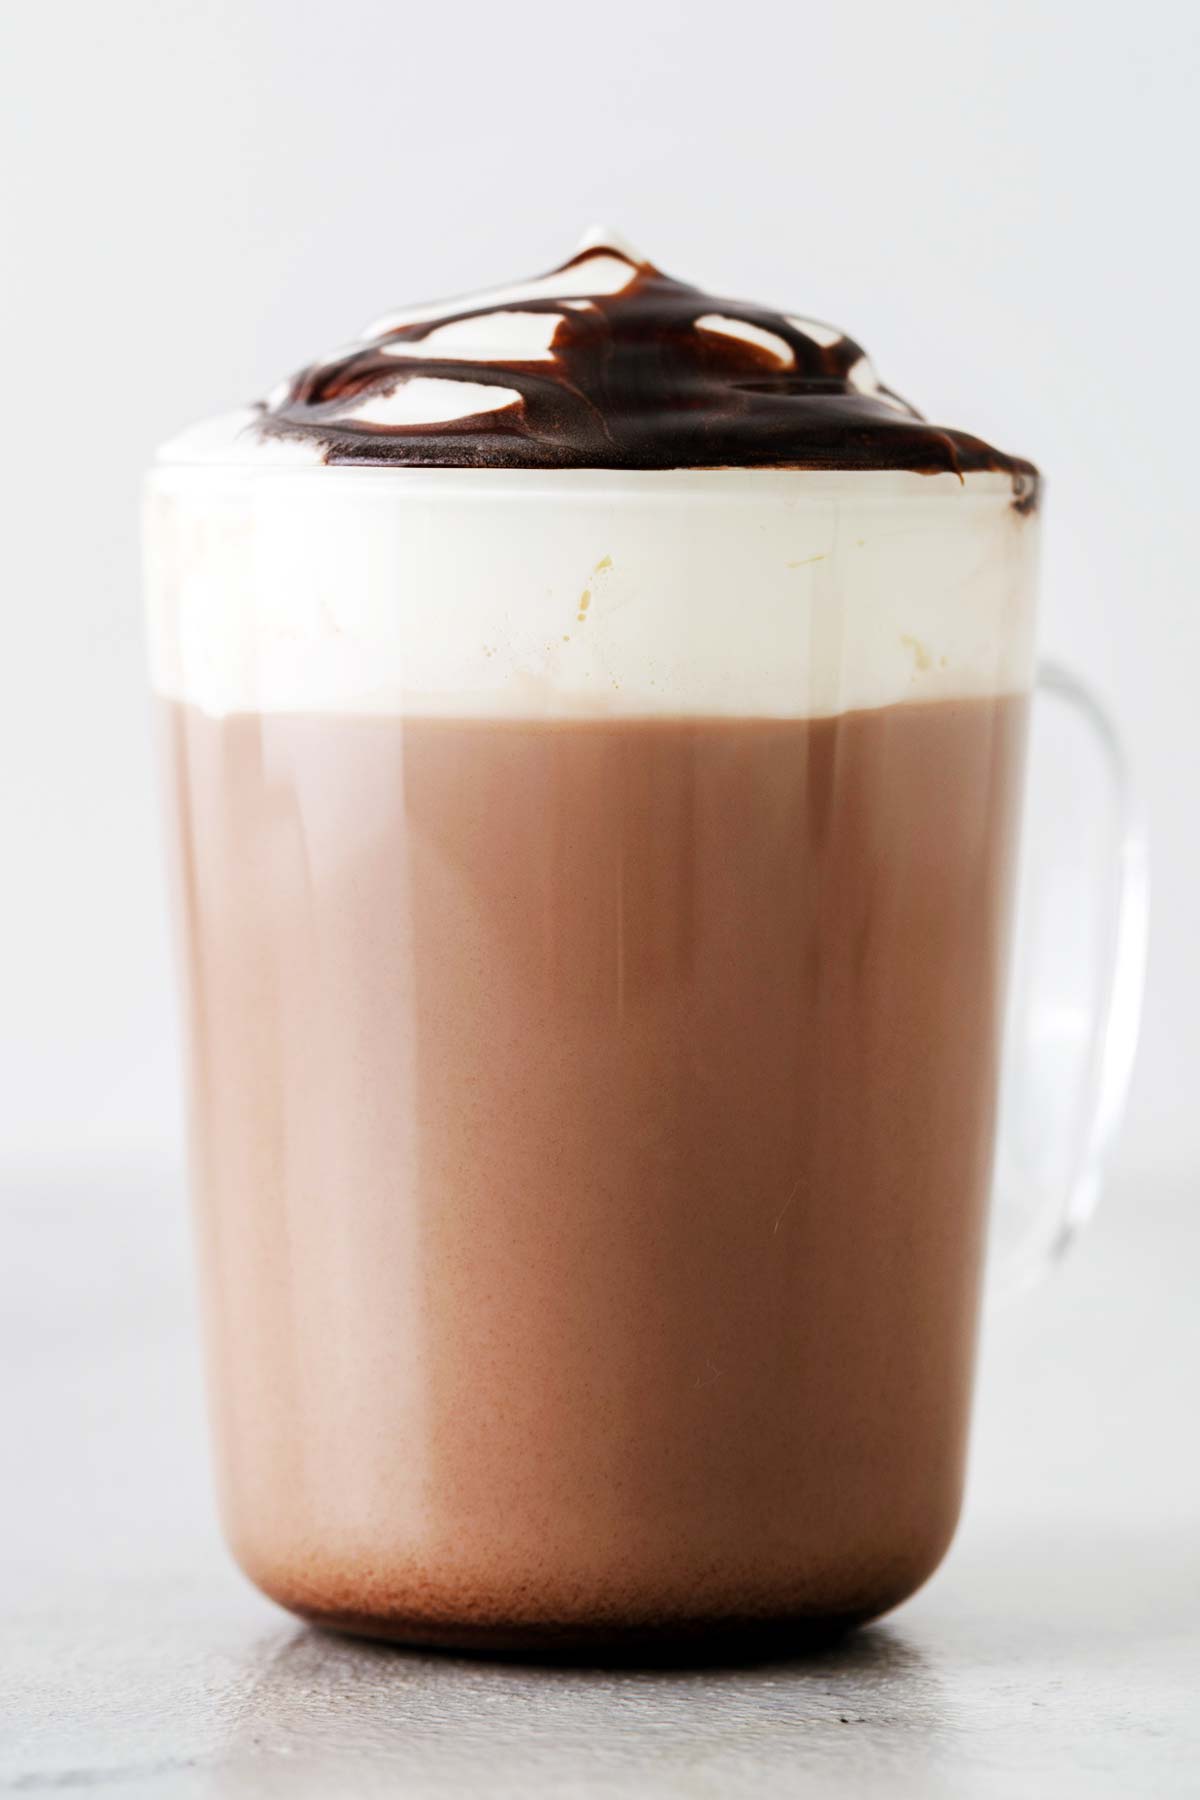 Homemade hot chocolate with whipped cream in a glass mug.